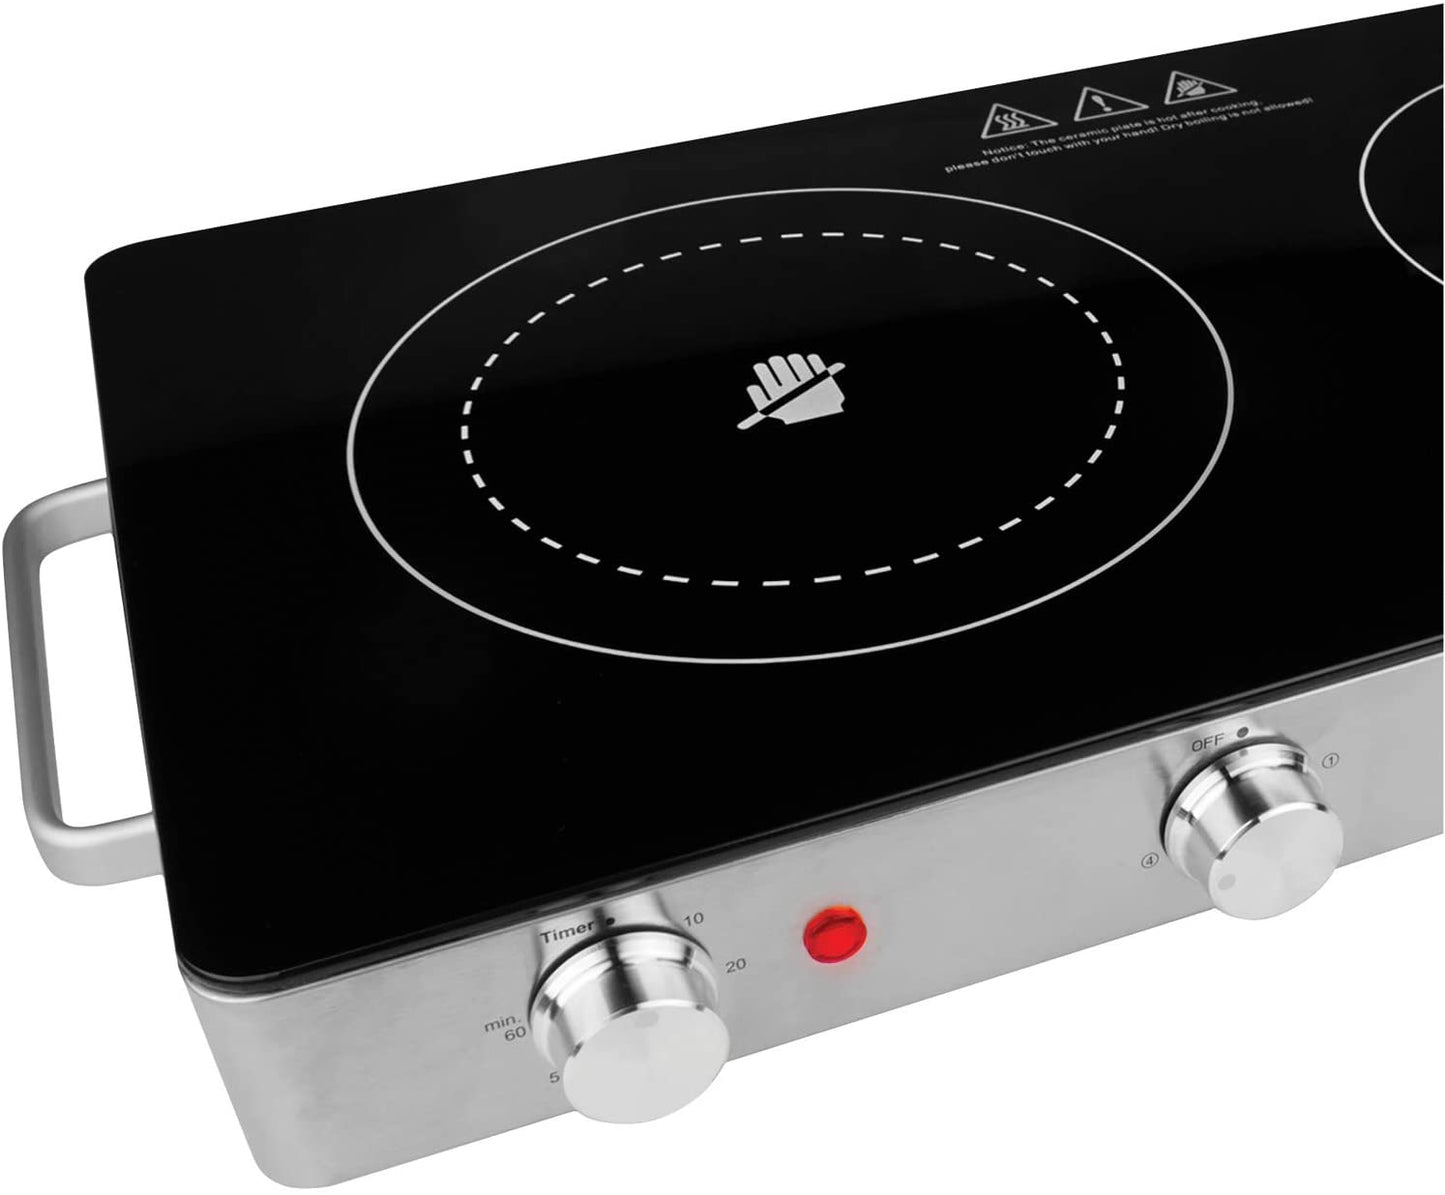 Double Infrared Electric Countertop Burner With Timer